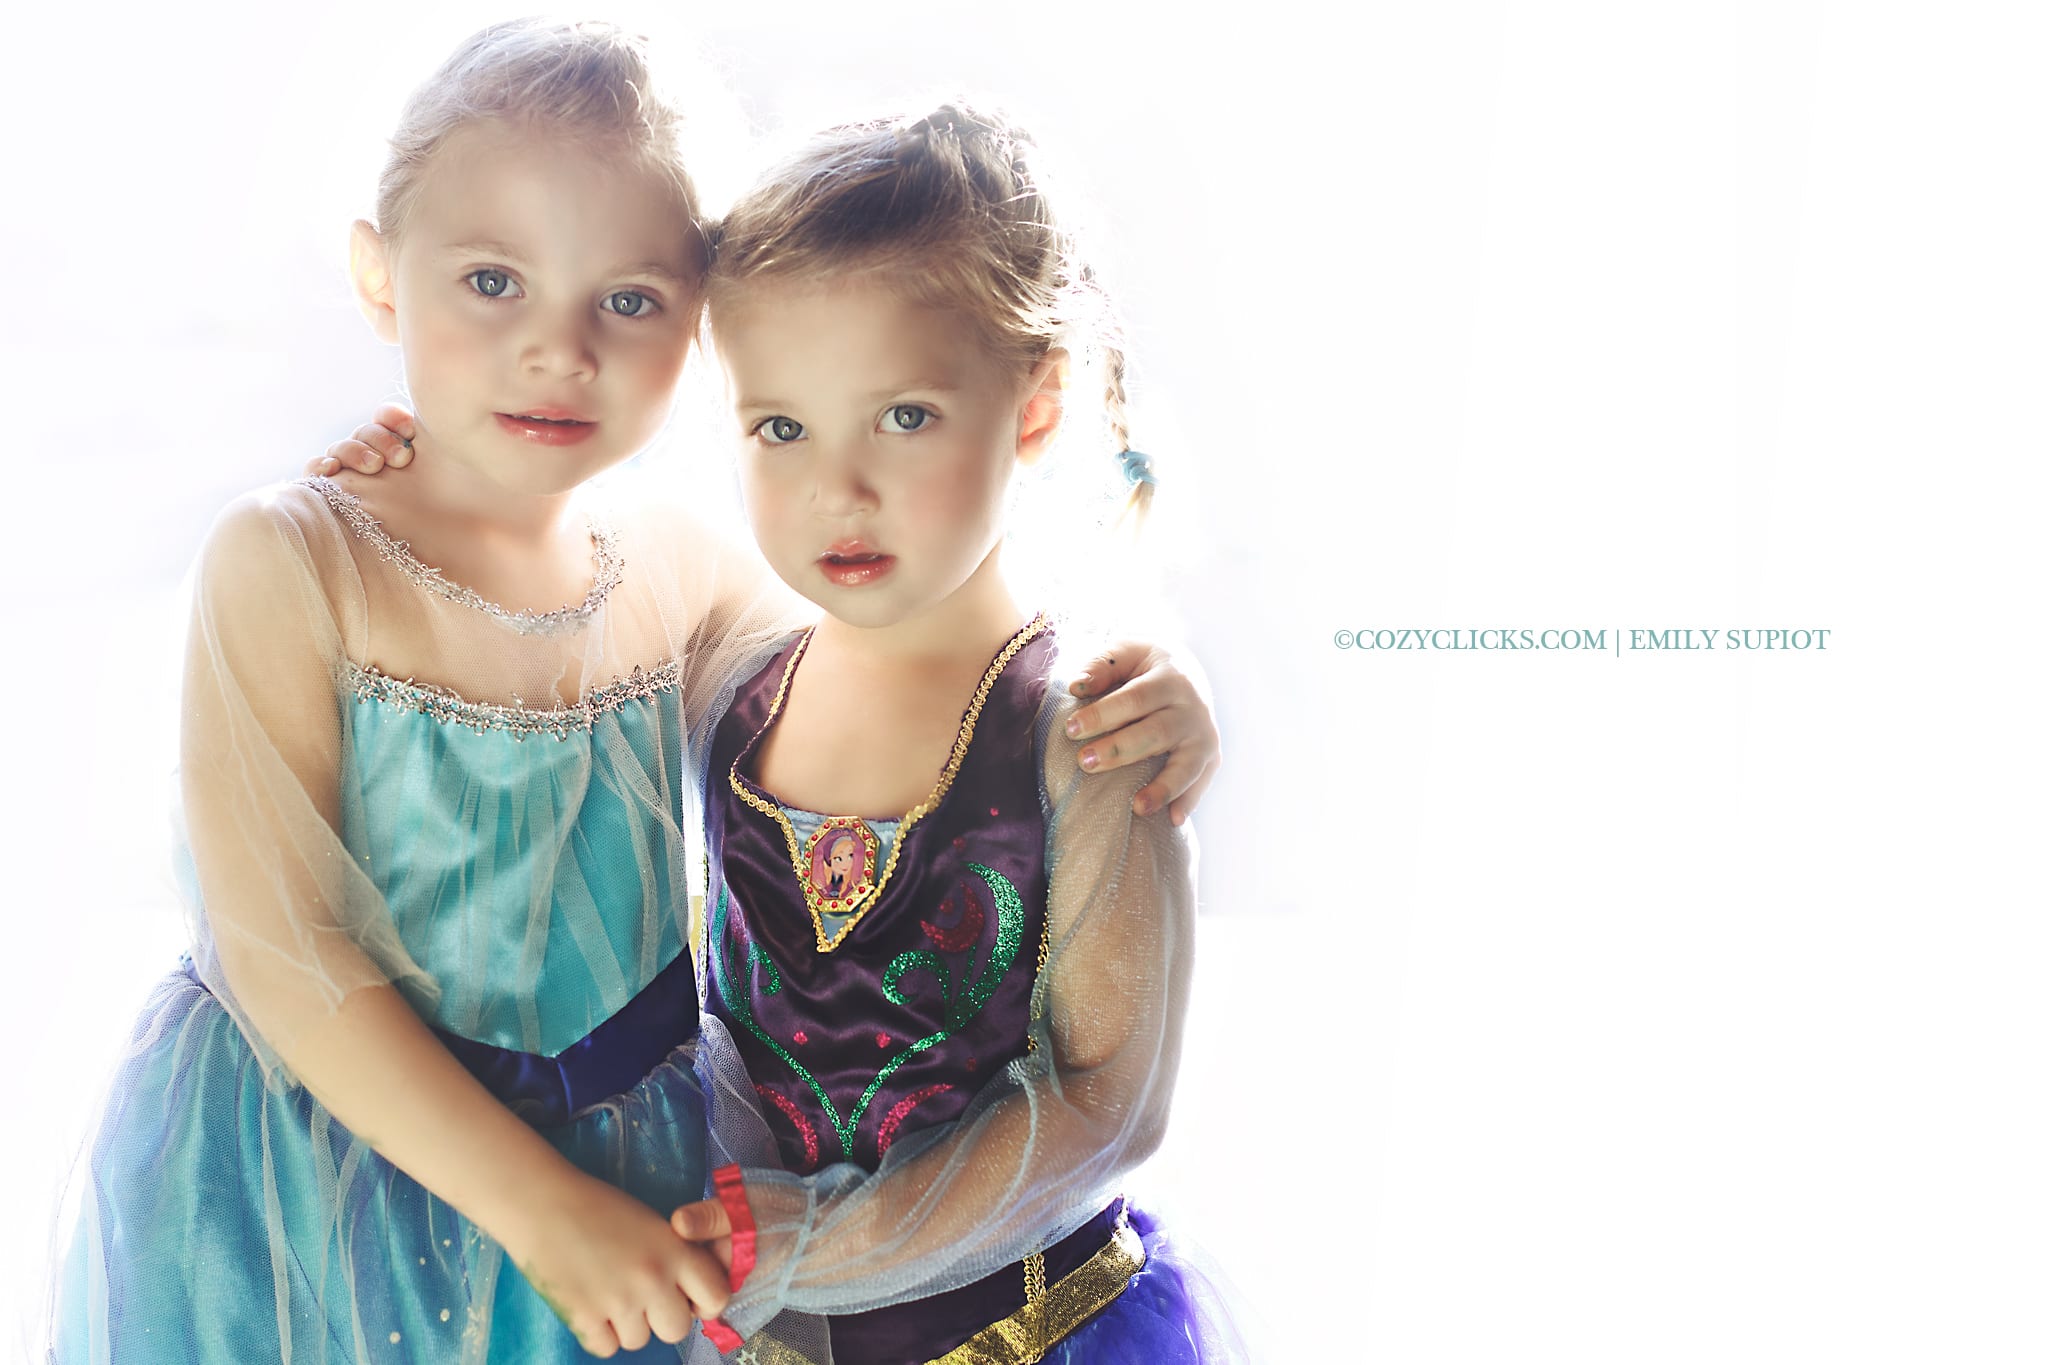 Frozeninspired children's photography.  Anna and Elsa sisters are friends forever